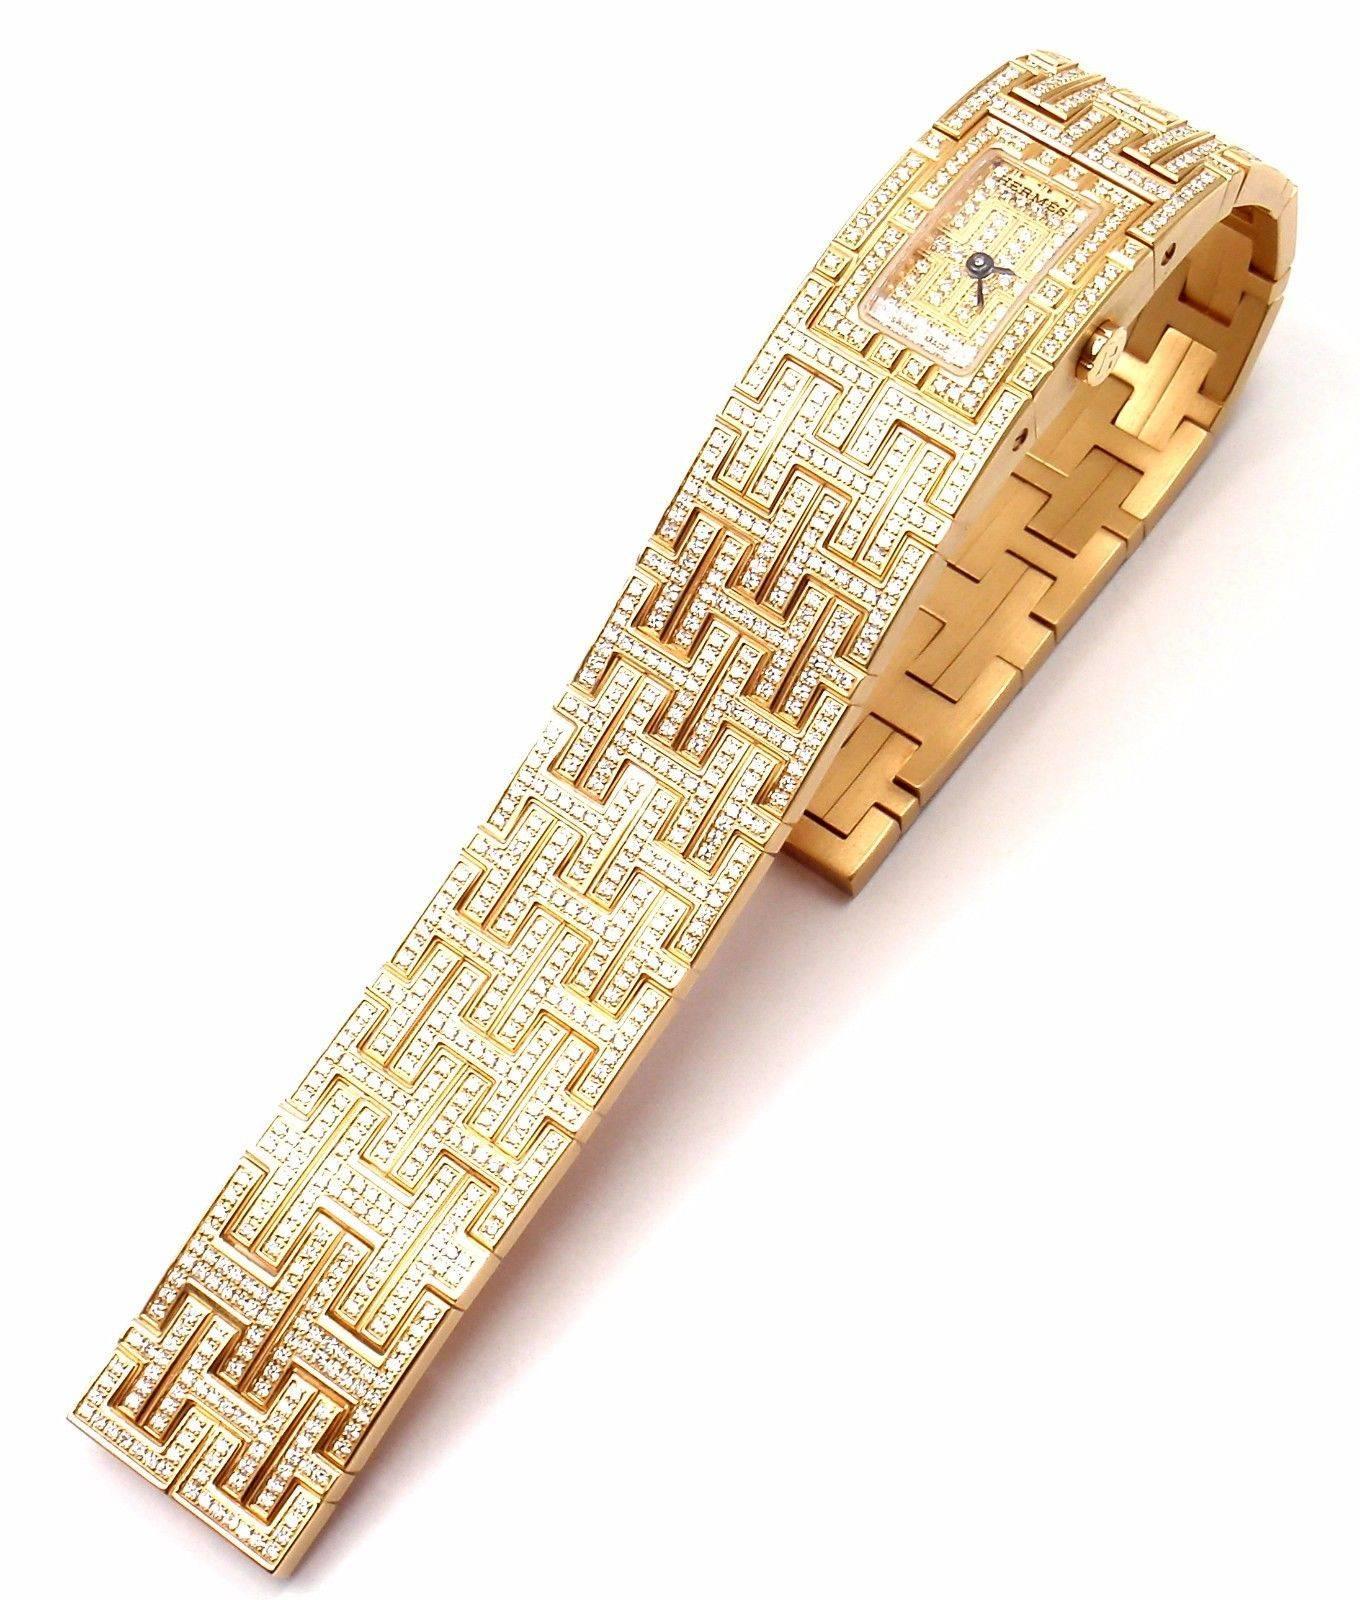 18k Yellow Gold Diamond Bracelet Kilim Watch by Hermes.  
This watch comes with original Hermes box and all the papers including a tag for $58,000 from 2007.
Certificate of authenticity from 5/9/2007.
With 1076 Round brilliant cut diamonds VVS1